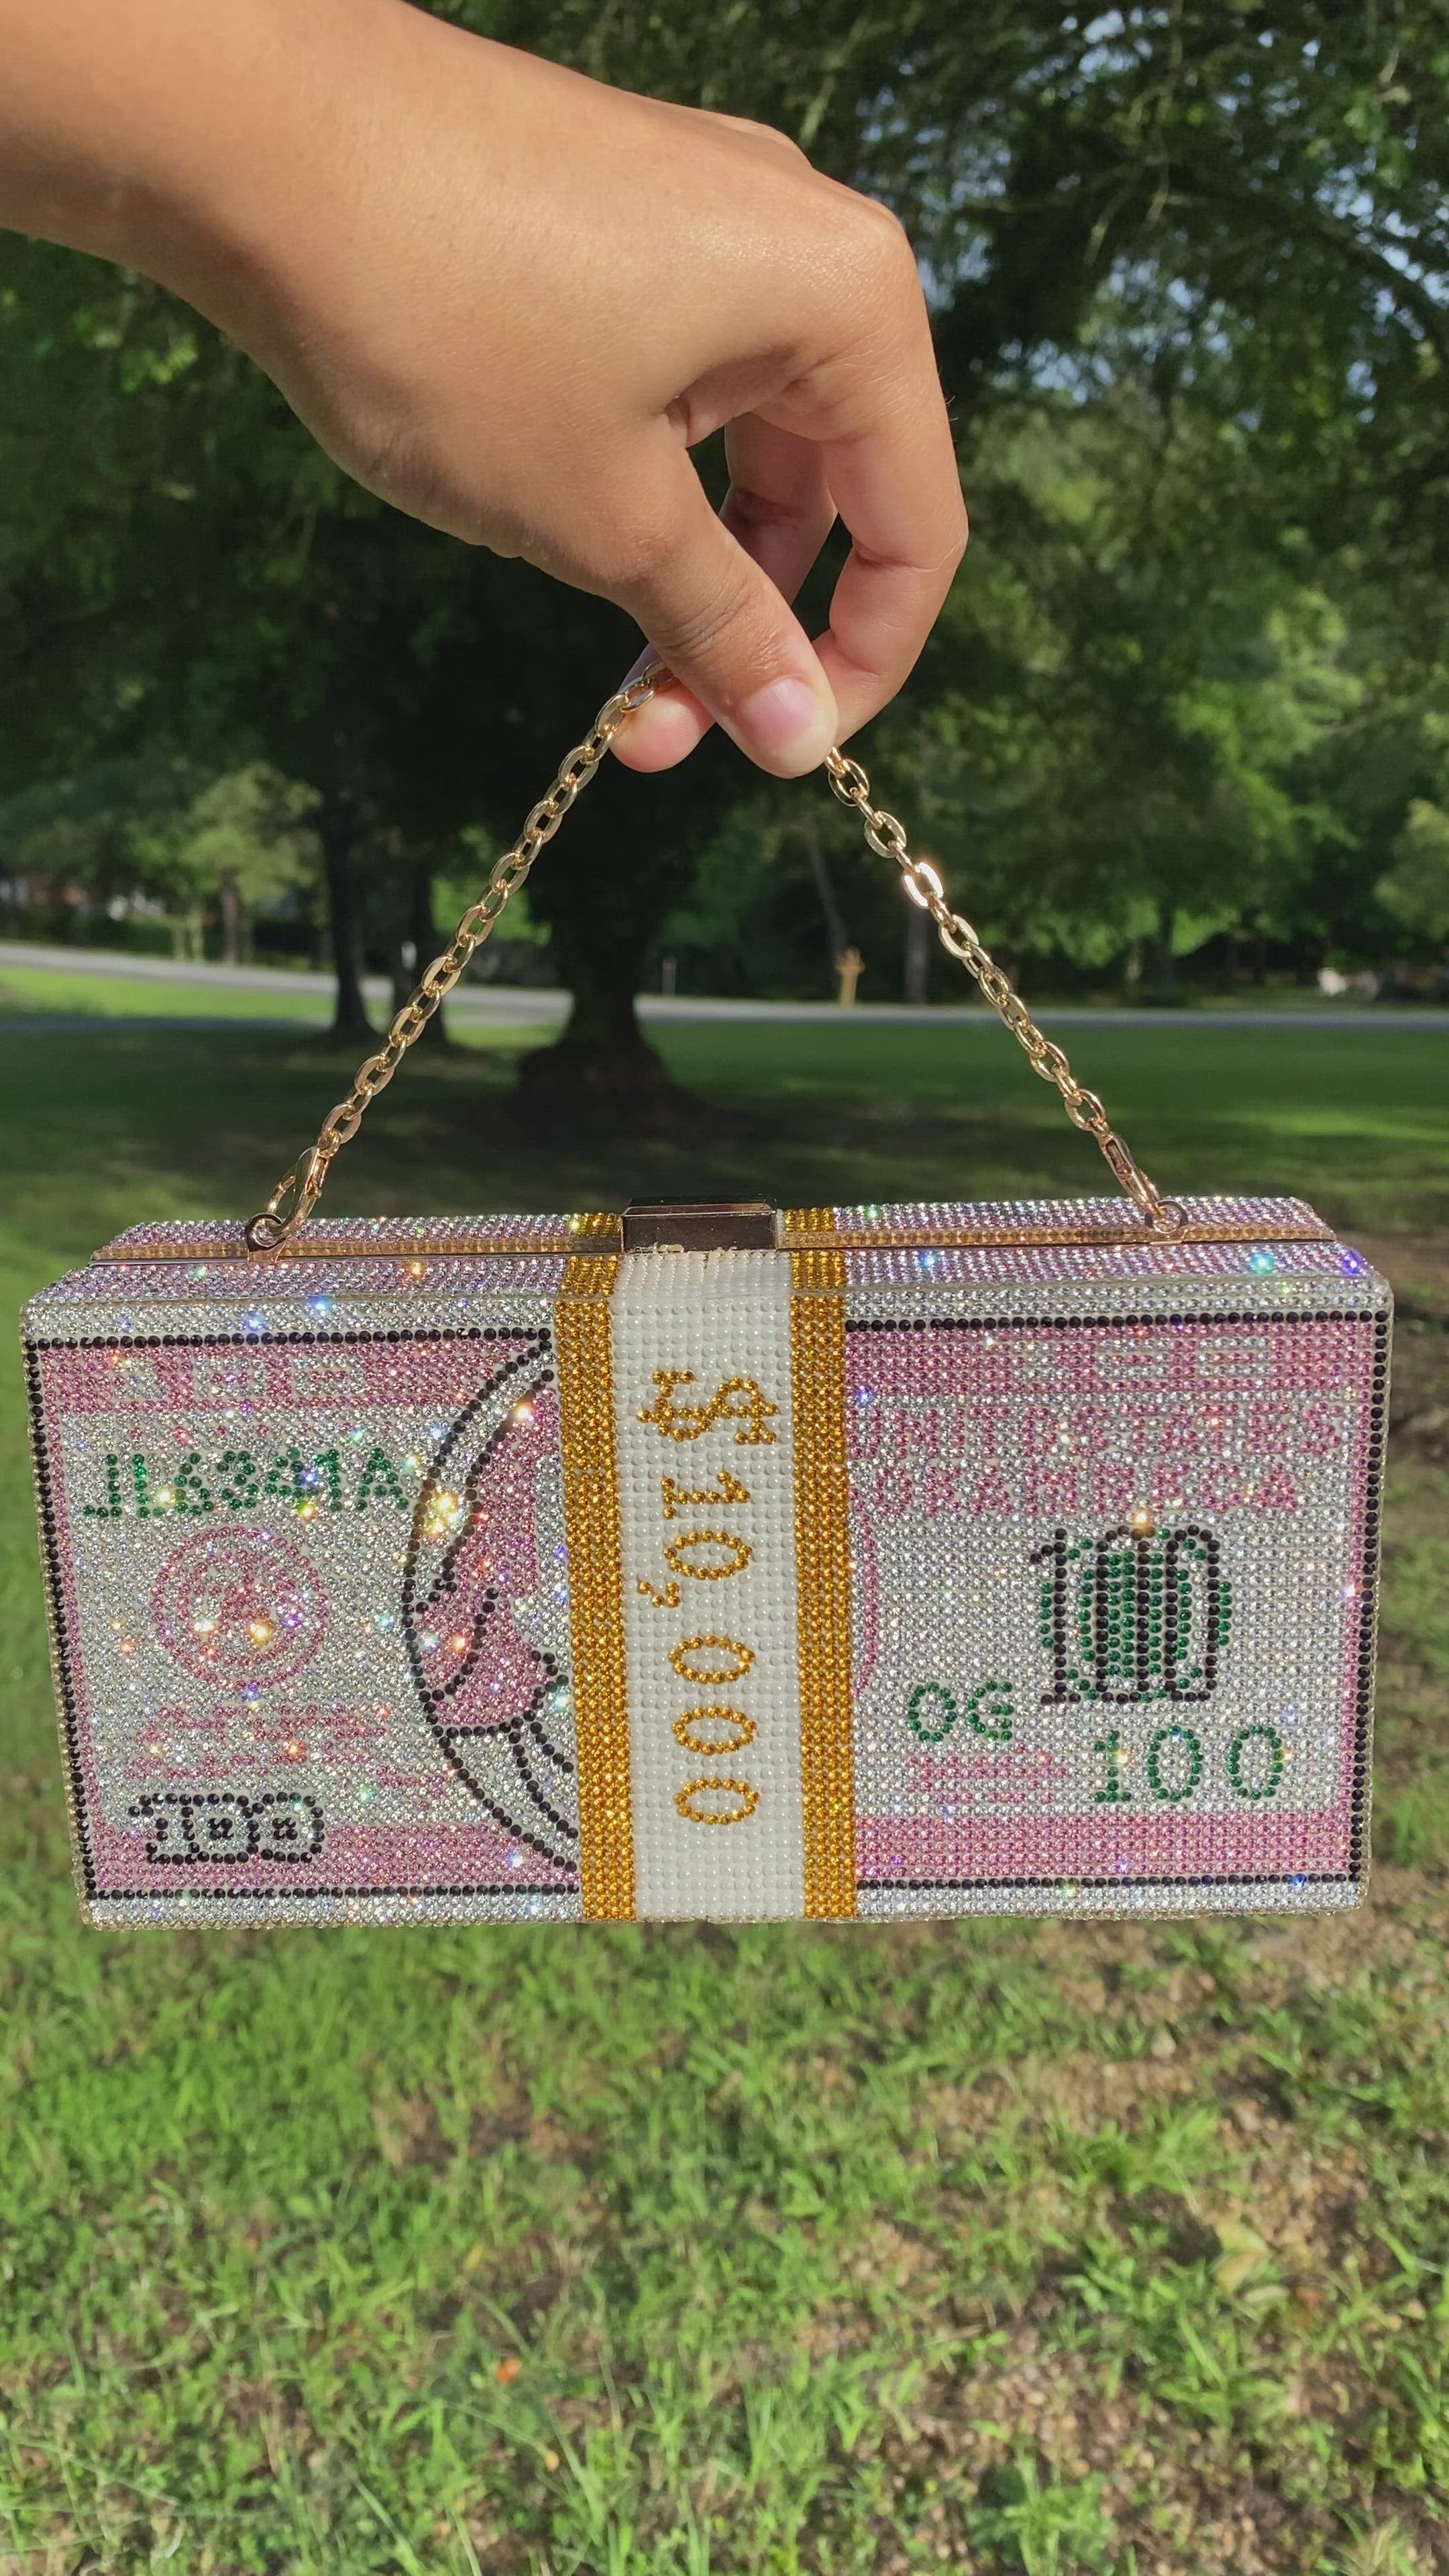 ONEQUEEN Ladies Square Shape Money Bag 100 Dollar Bill Purse With Chain  From Showway, $125.58 | DHgate.Com